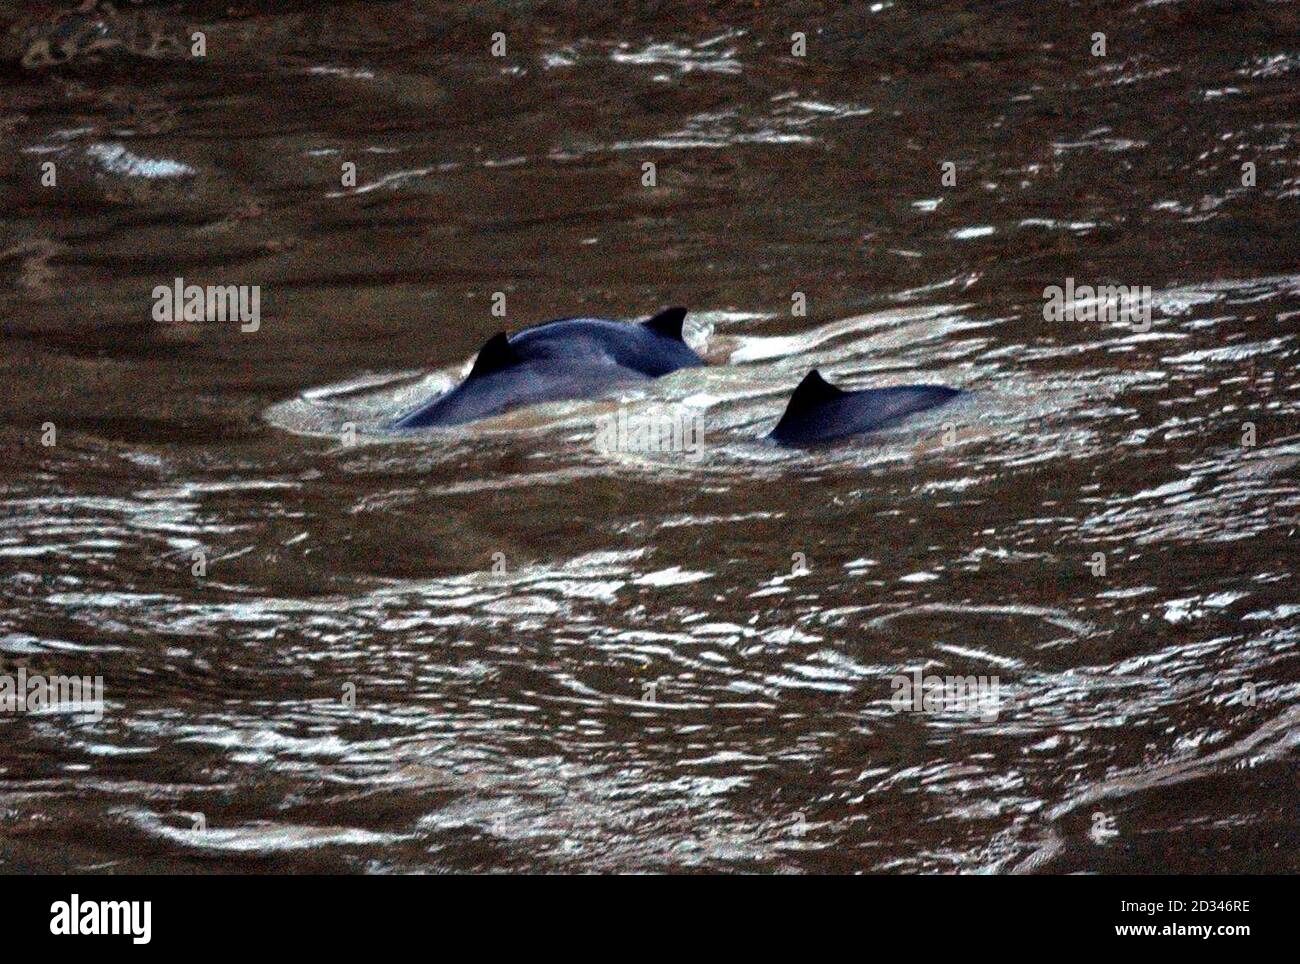 Porpoises swim in the Thames by Vauxhall Bridge in Westminster. The mammals had been sited over the years but there are no offical records of them being found in the Thames. Stock Photo